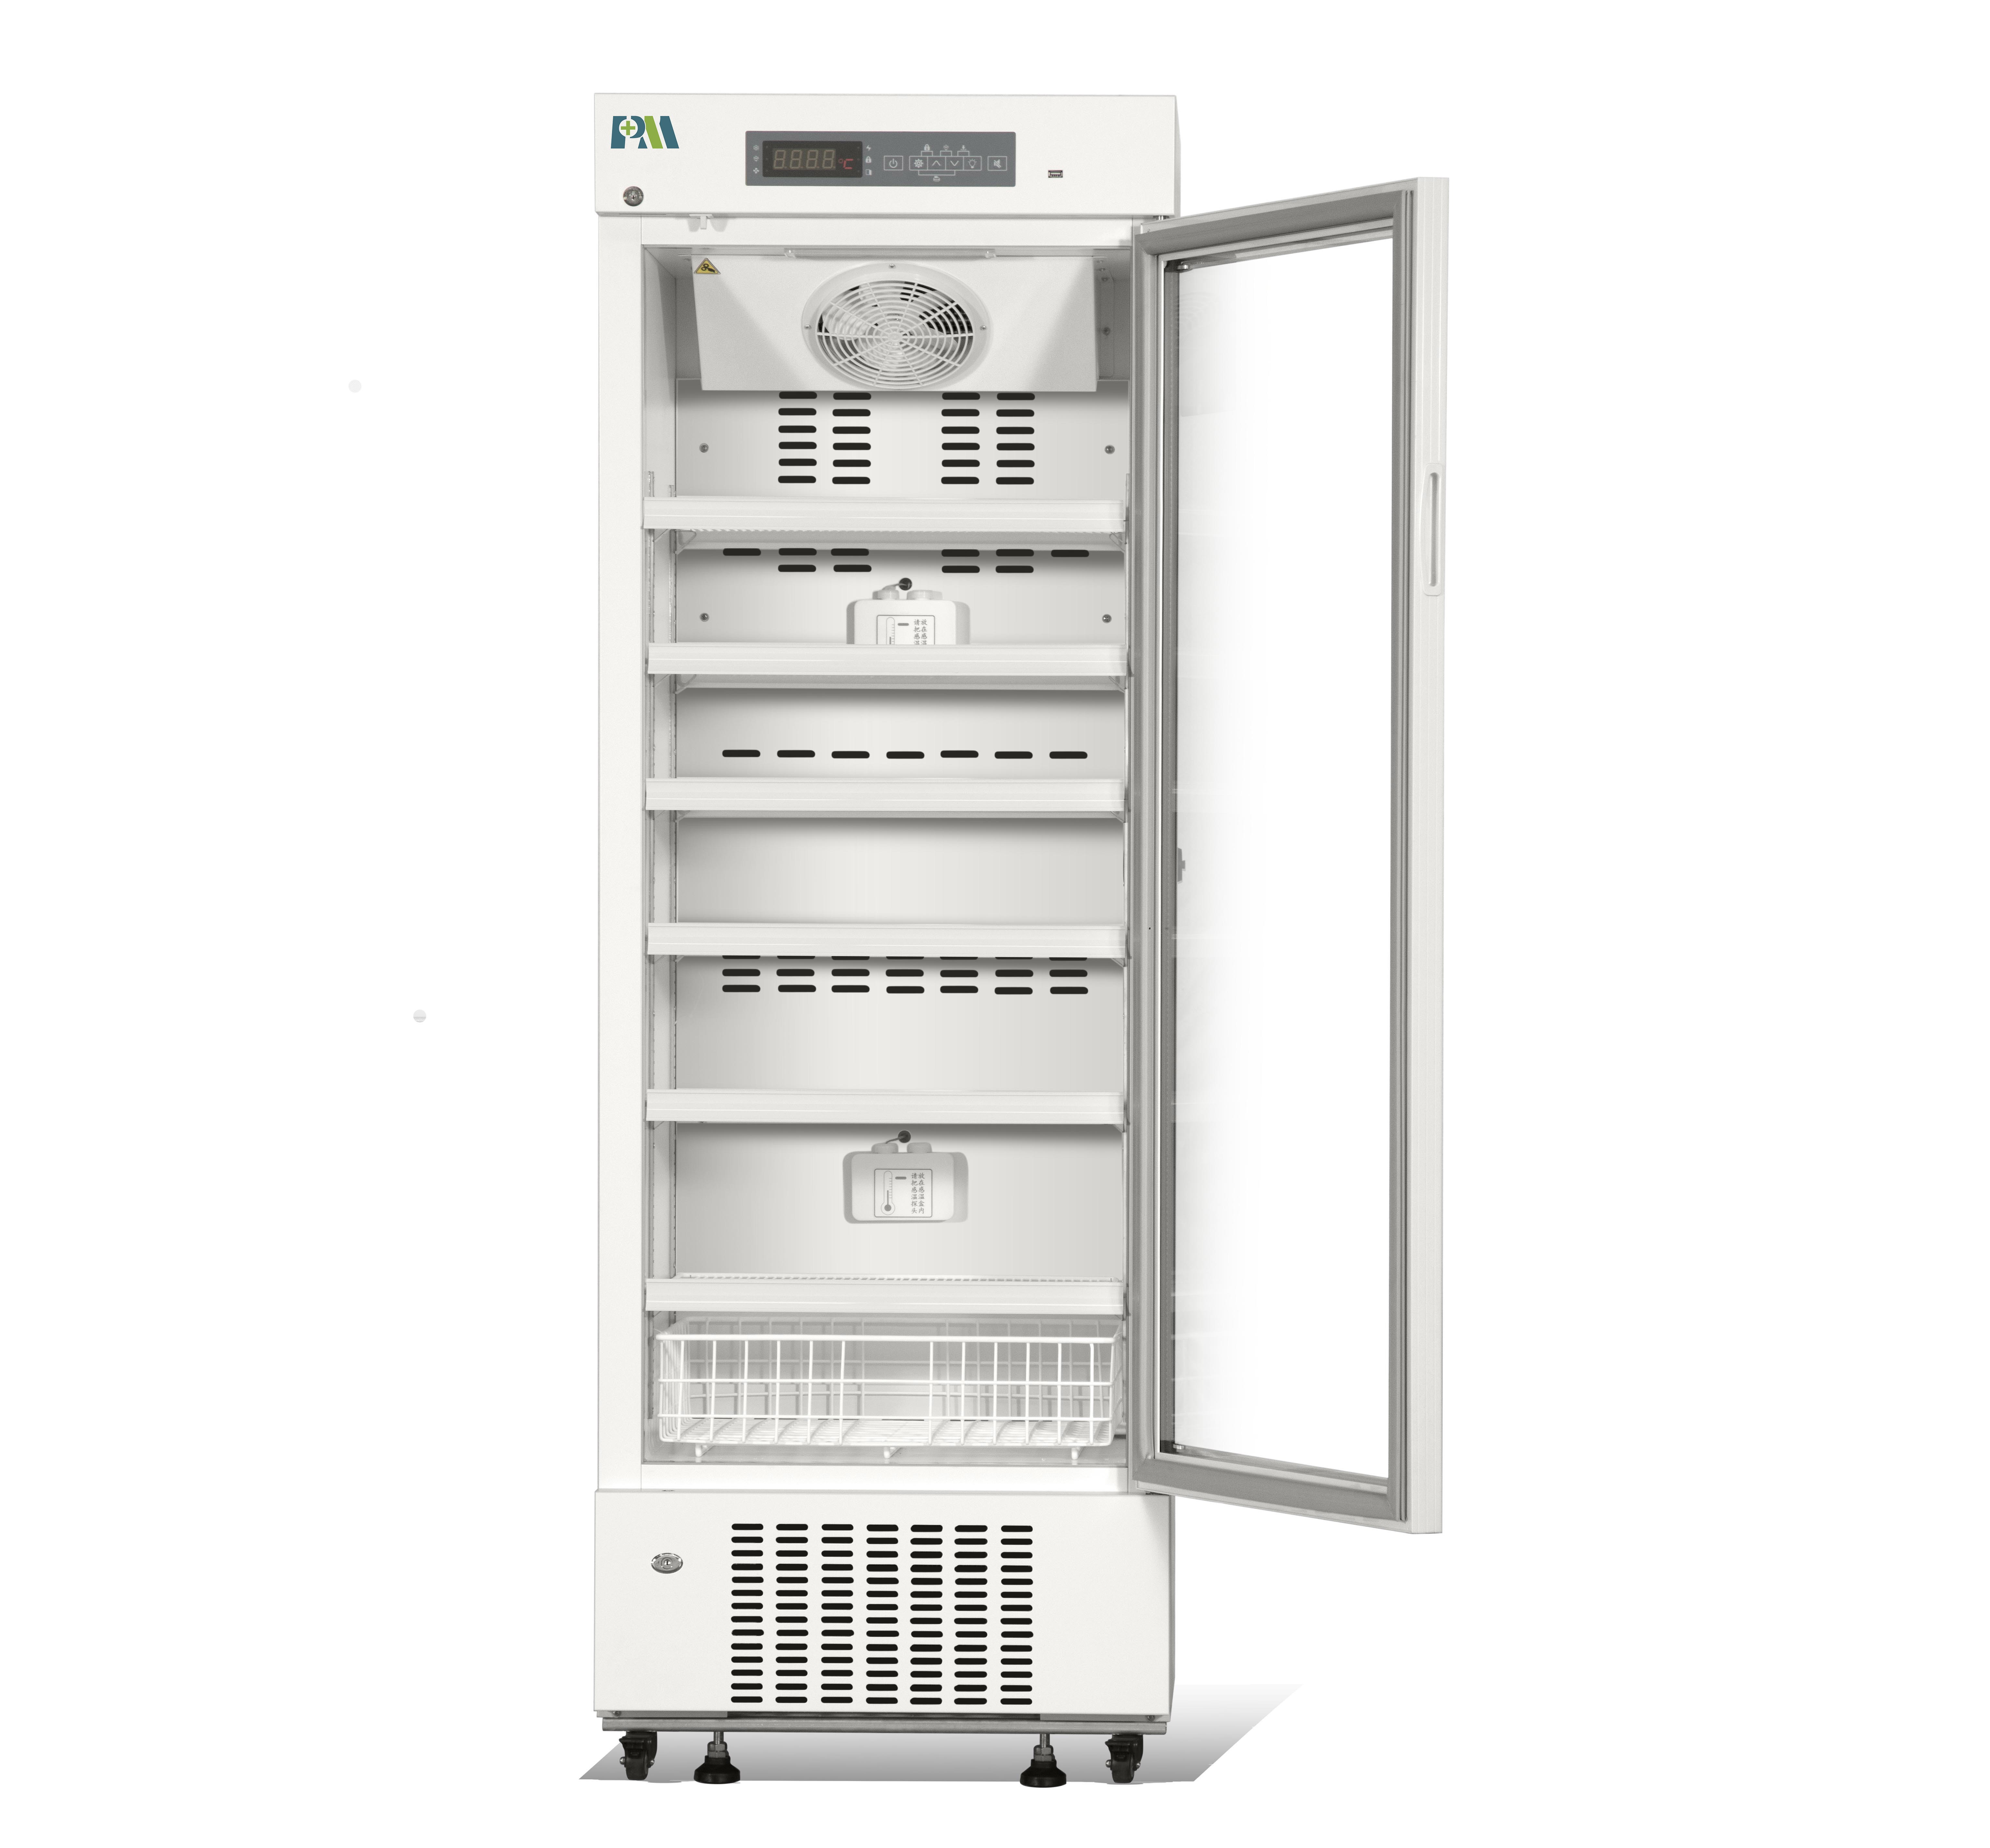 Air-Cooling System 2~8 Degree +315L Glass Door Pharmacy and Medical Refrigerator with USB Port and Test Hole